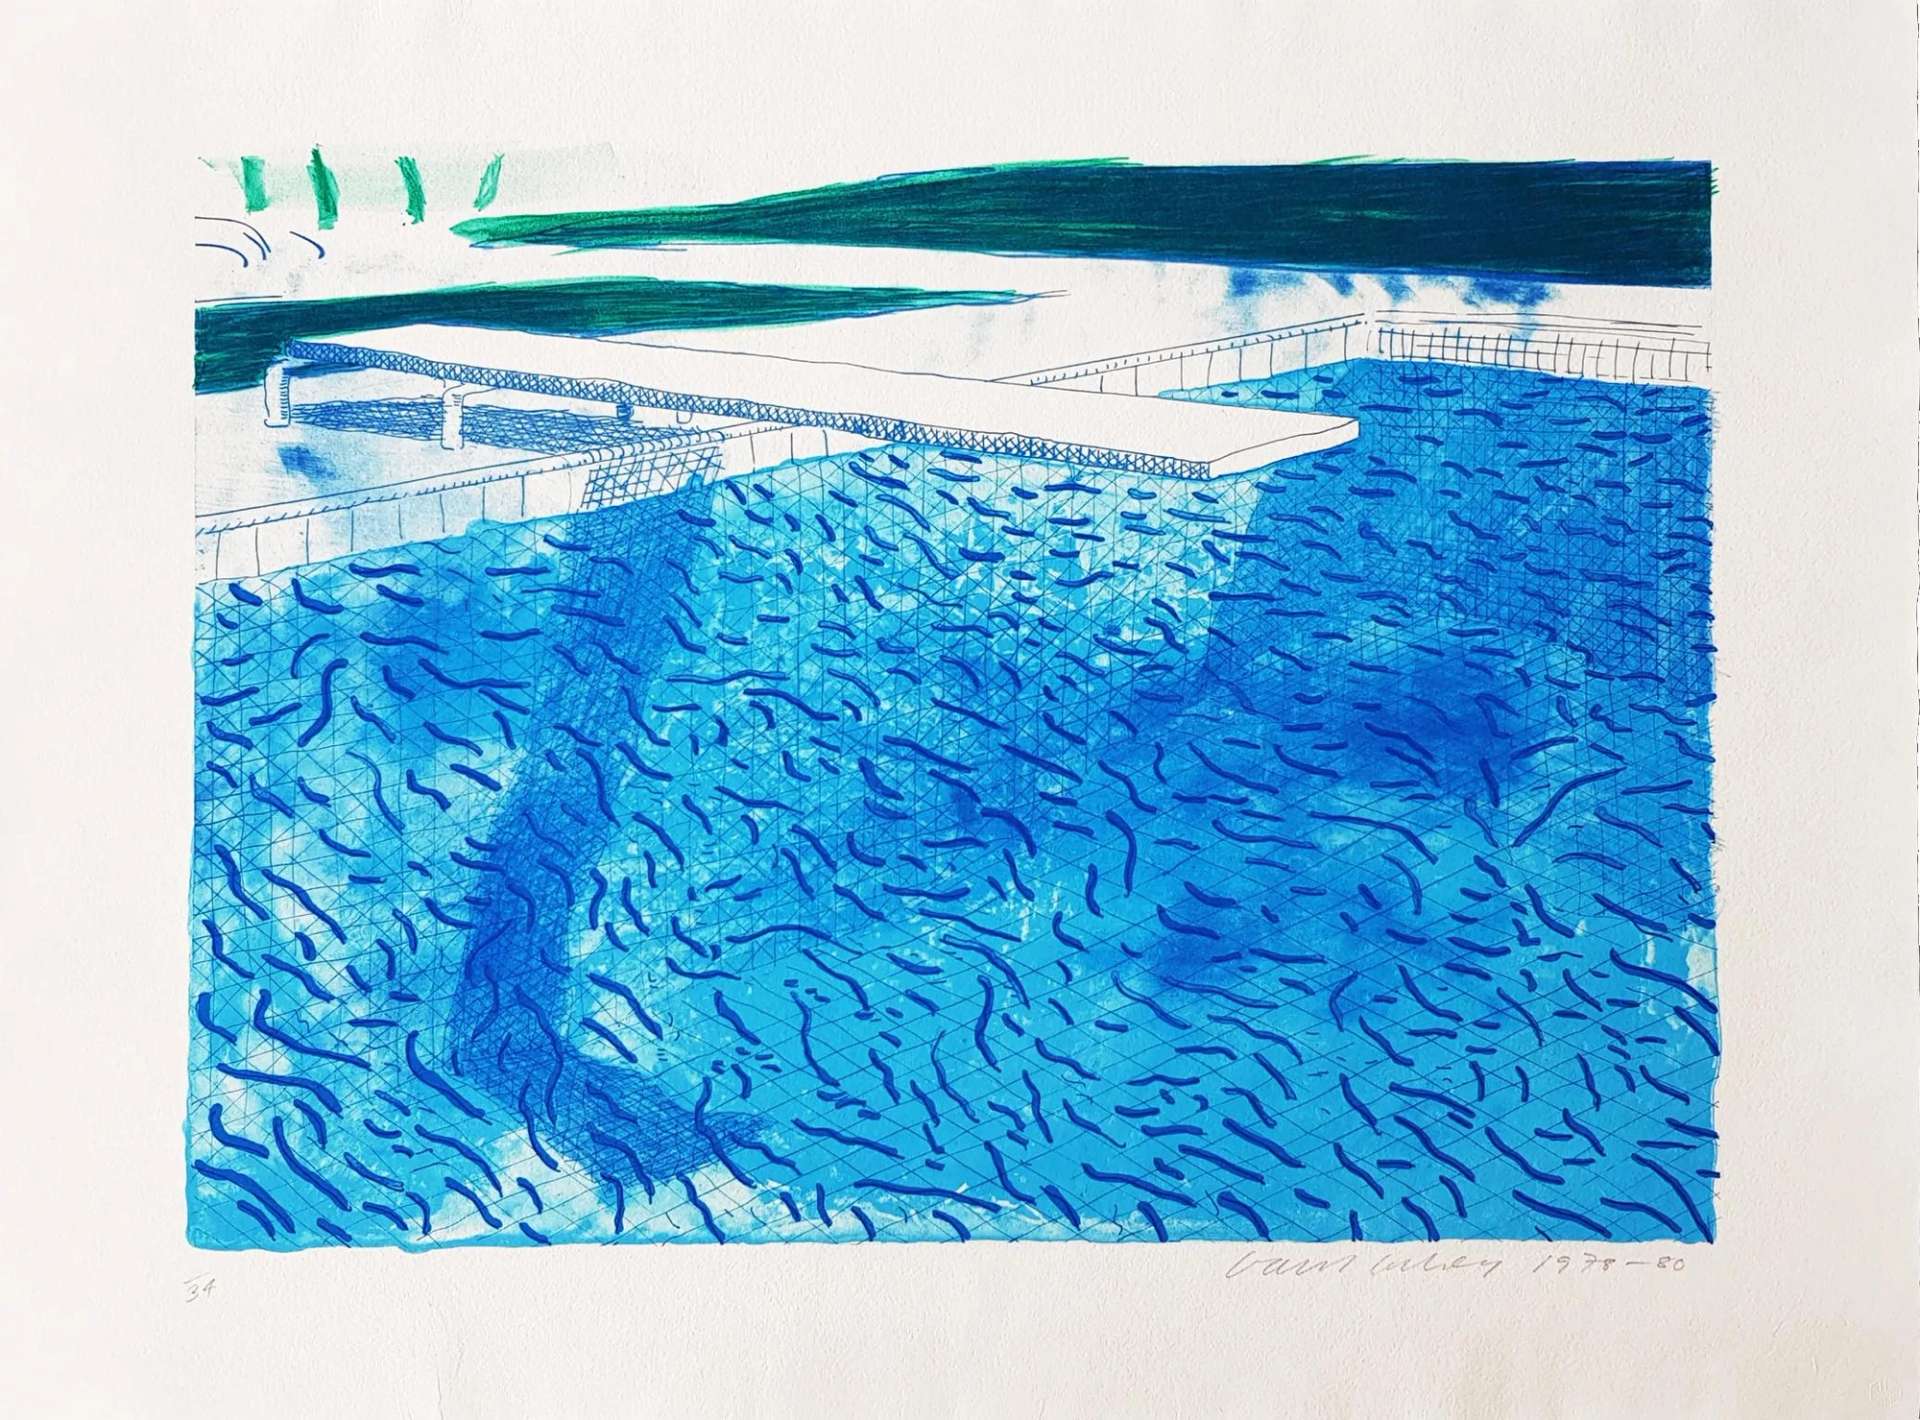 A depiction of a swimming pool with a diving board by David Hockney, executed in lithography. A square tile pattern pokes through the surface of the water, revealing the depth of the swimming pool as well as the lustre surface of its bottom.